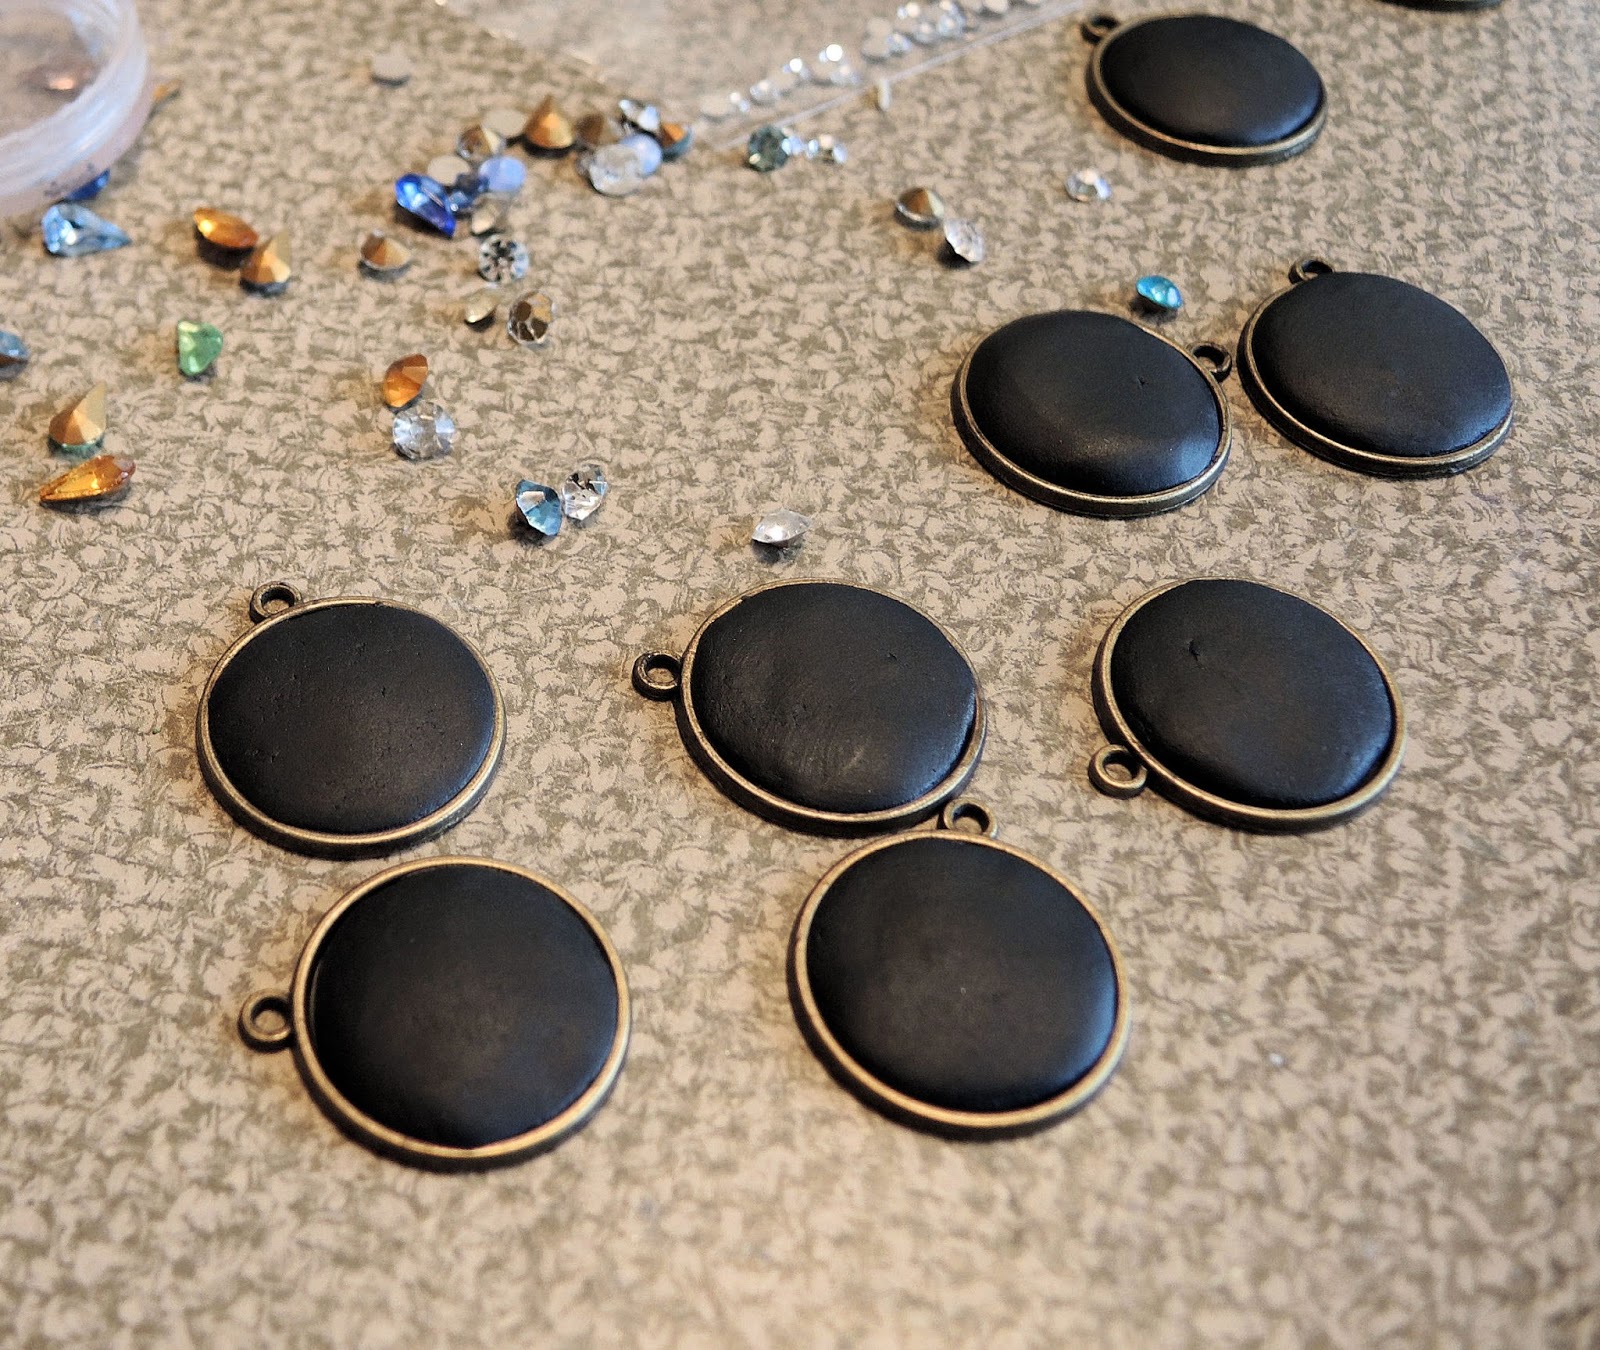 Bezels filled with epoxy clay